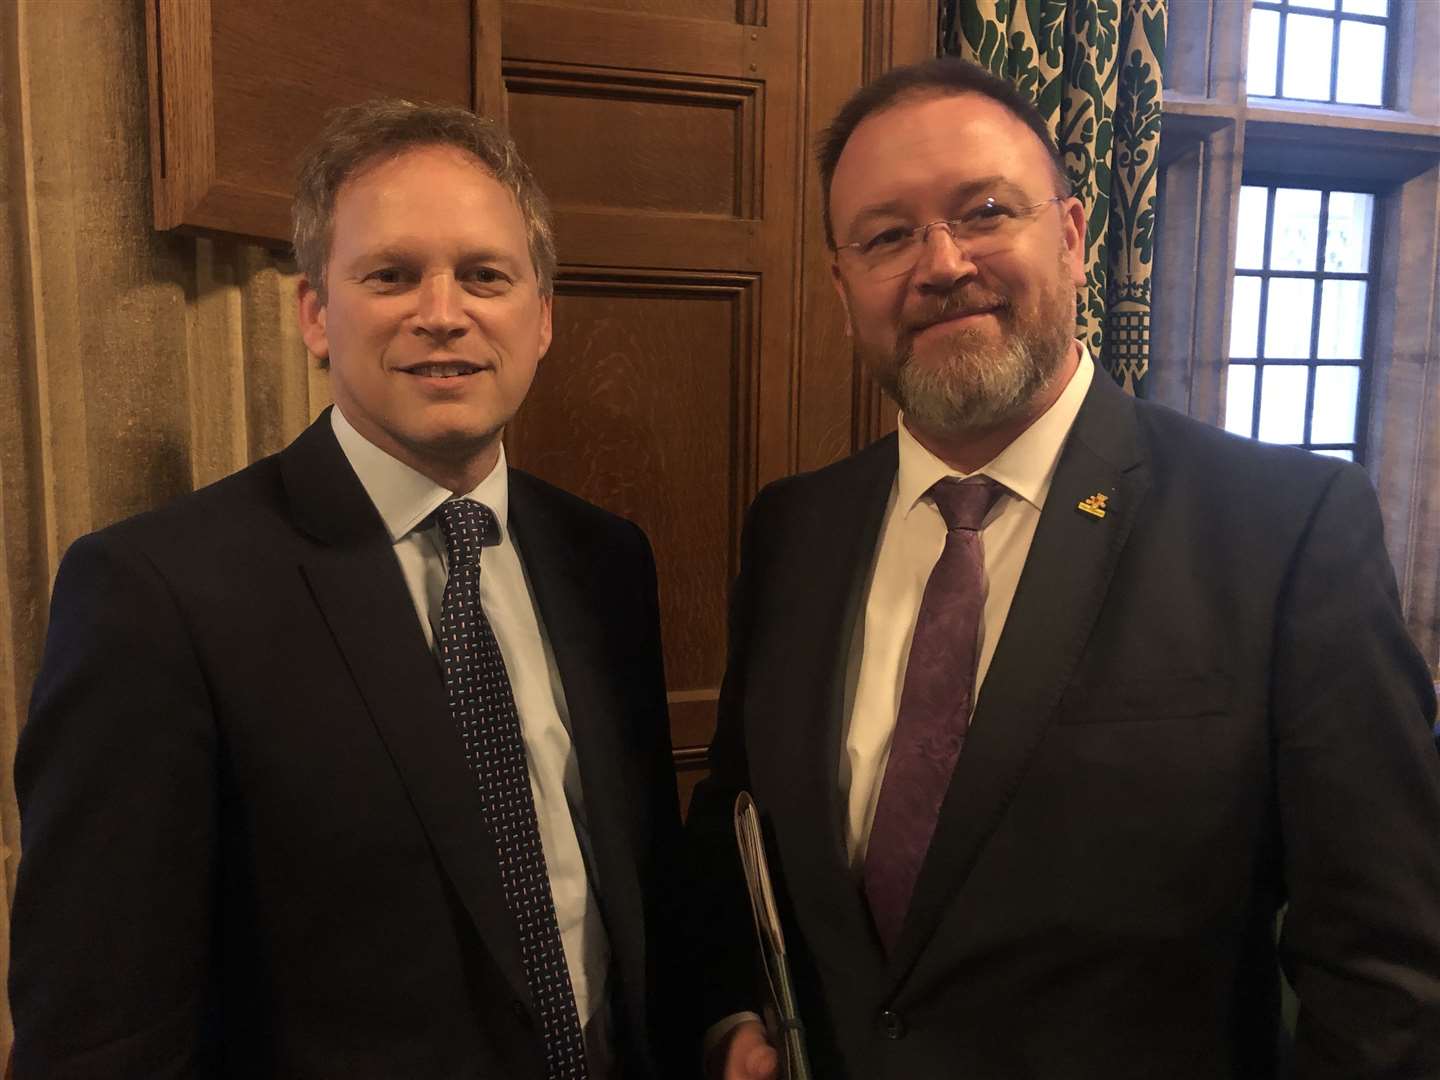 Transport minister Grant Shapps and MP David Duguid.